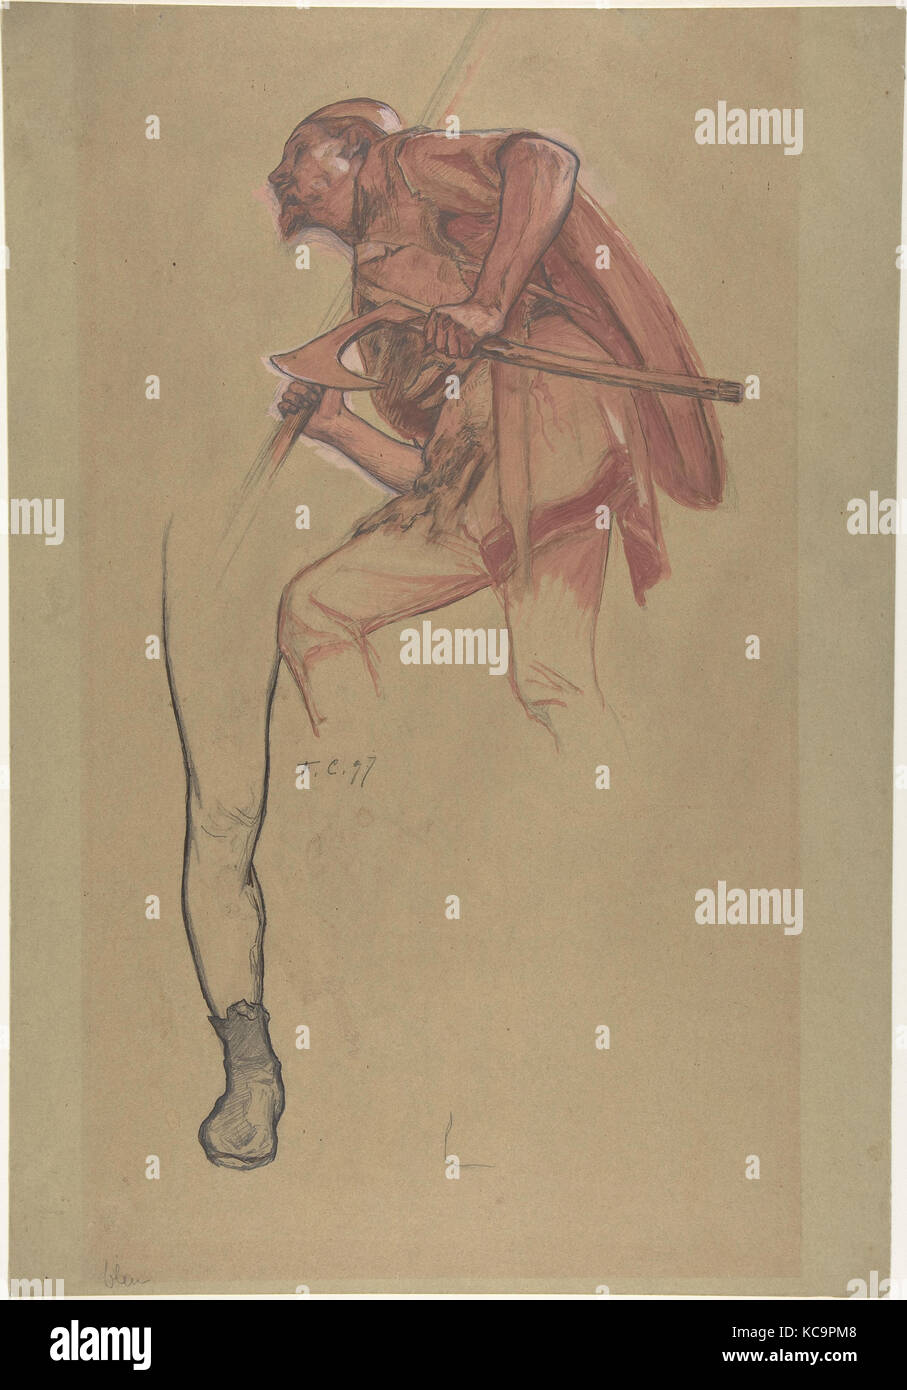 Warrior with an Axe and Study of a Leg, Fernand Cormon, 1897 Stock Photo